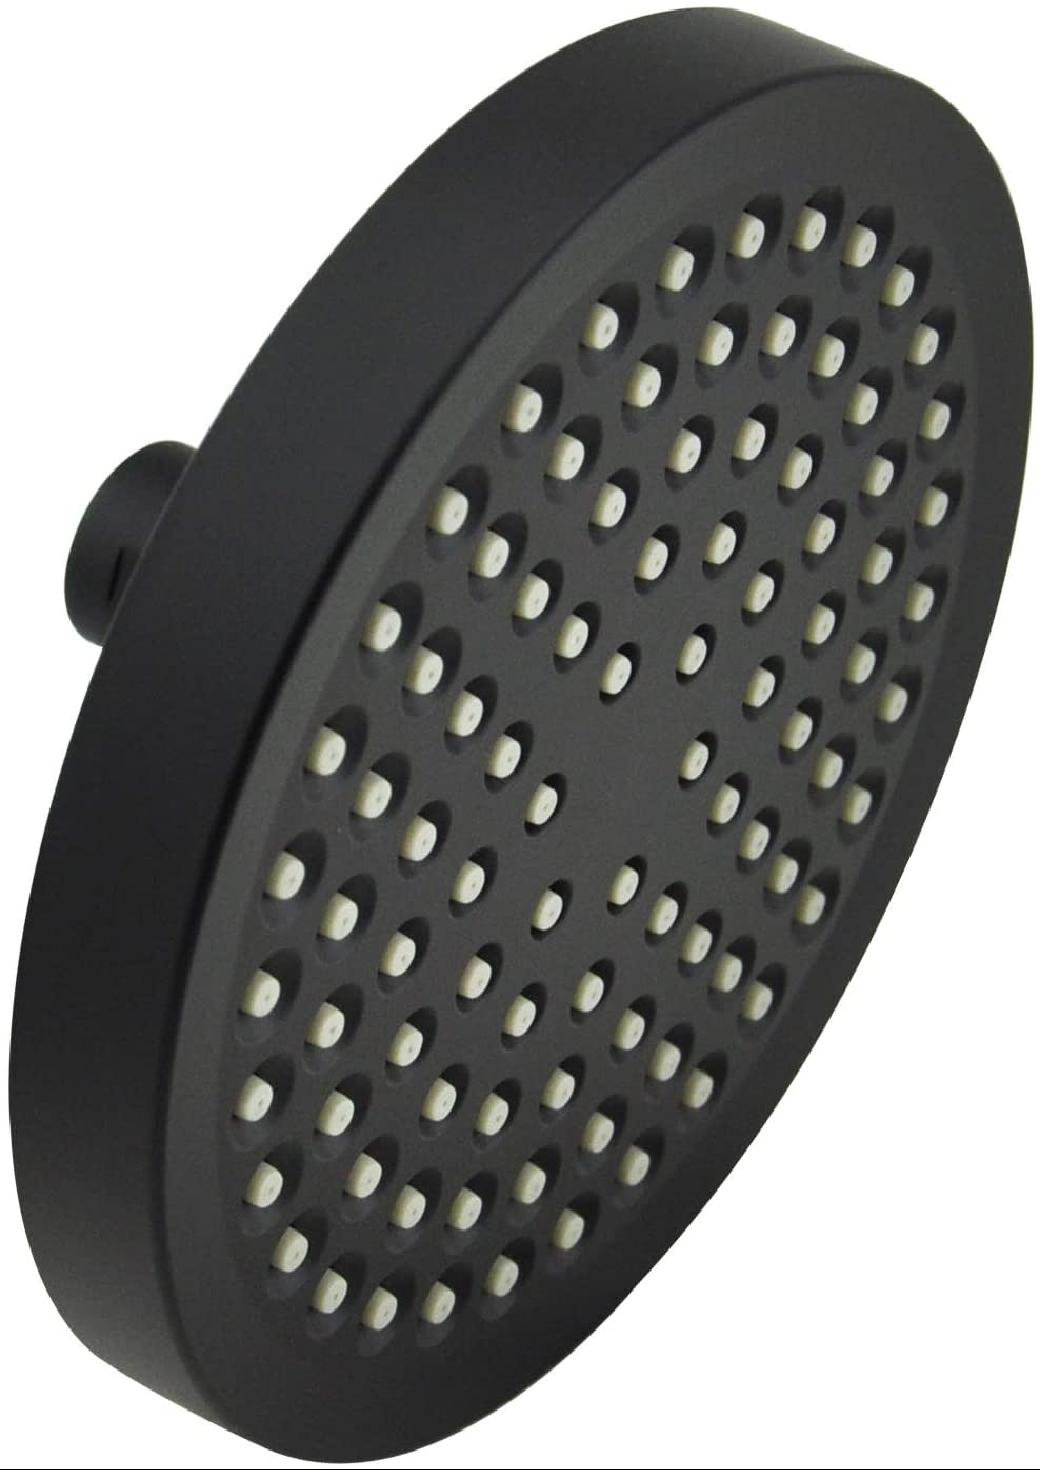 Solid Brass Shower Head with 6 Inch Shower Arm and Flange High Pressure Heavy Duty Matte Black 